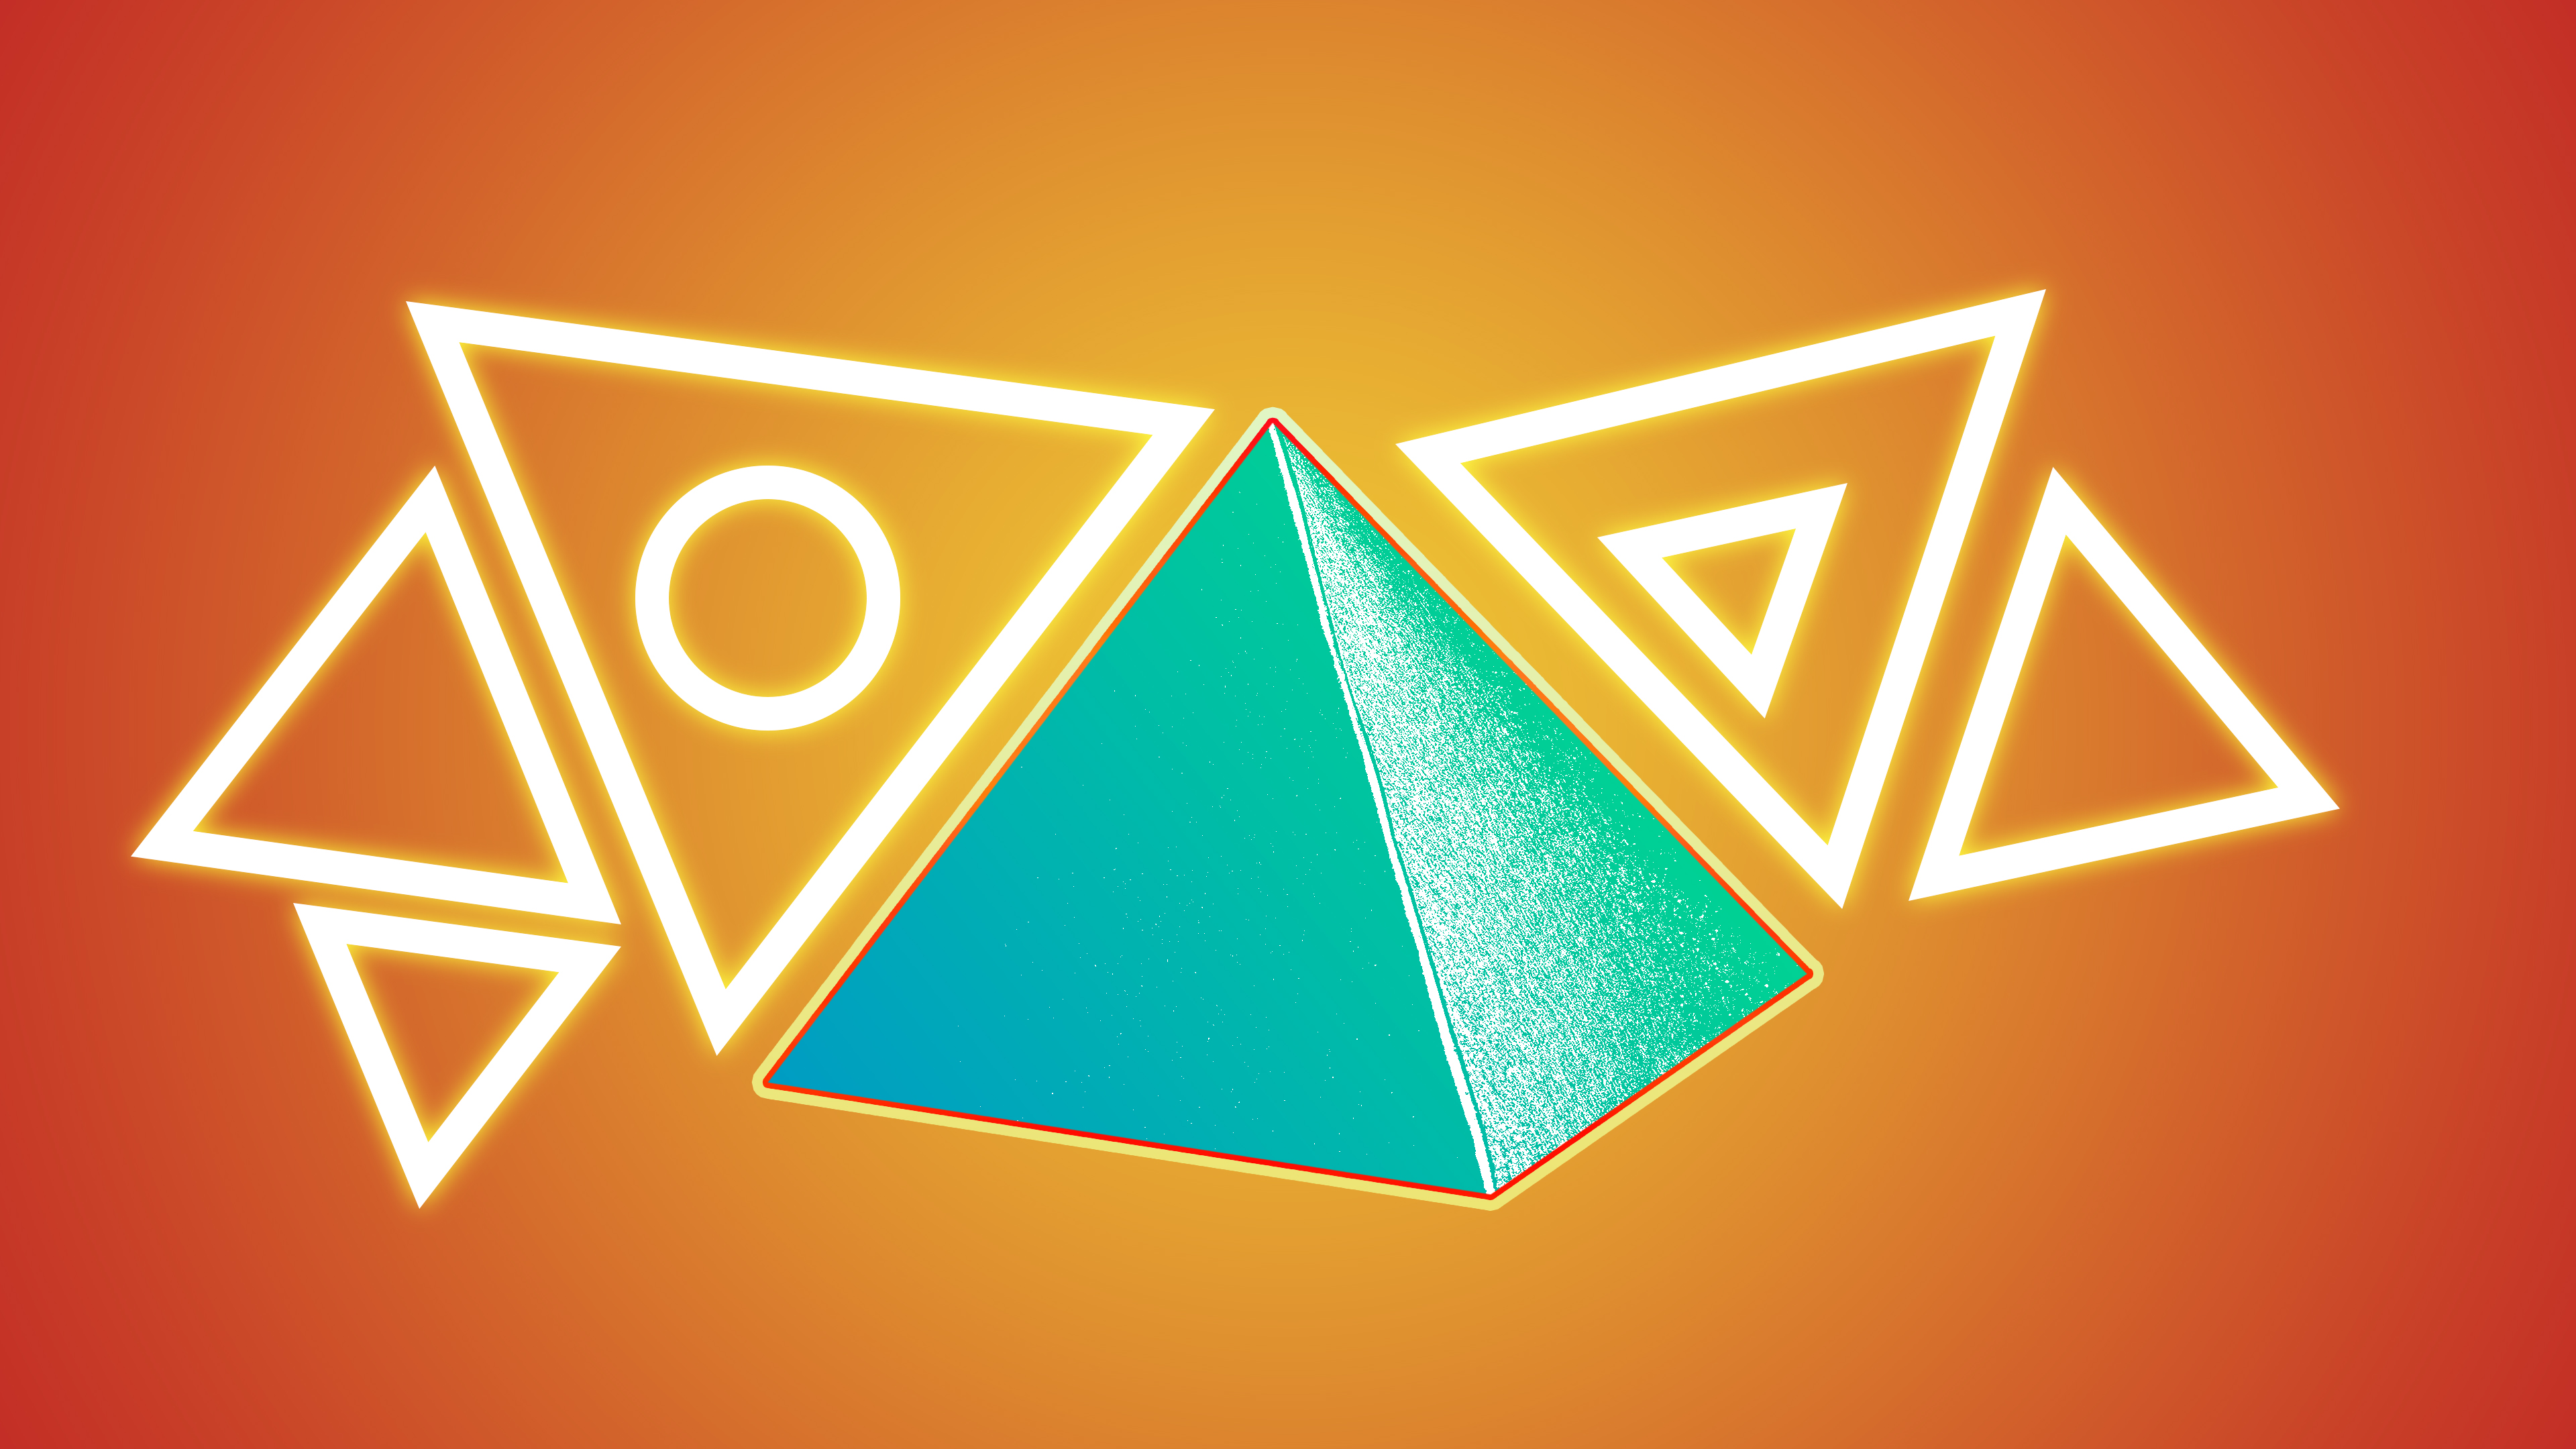 Artistic Pyramid HD Wallpaper | Background Image